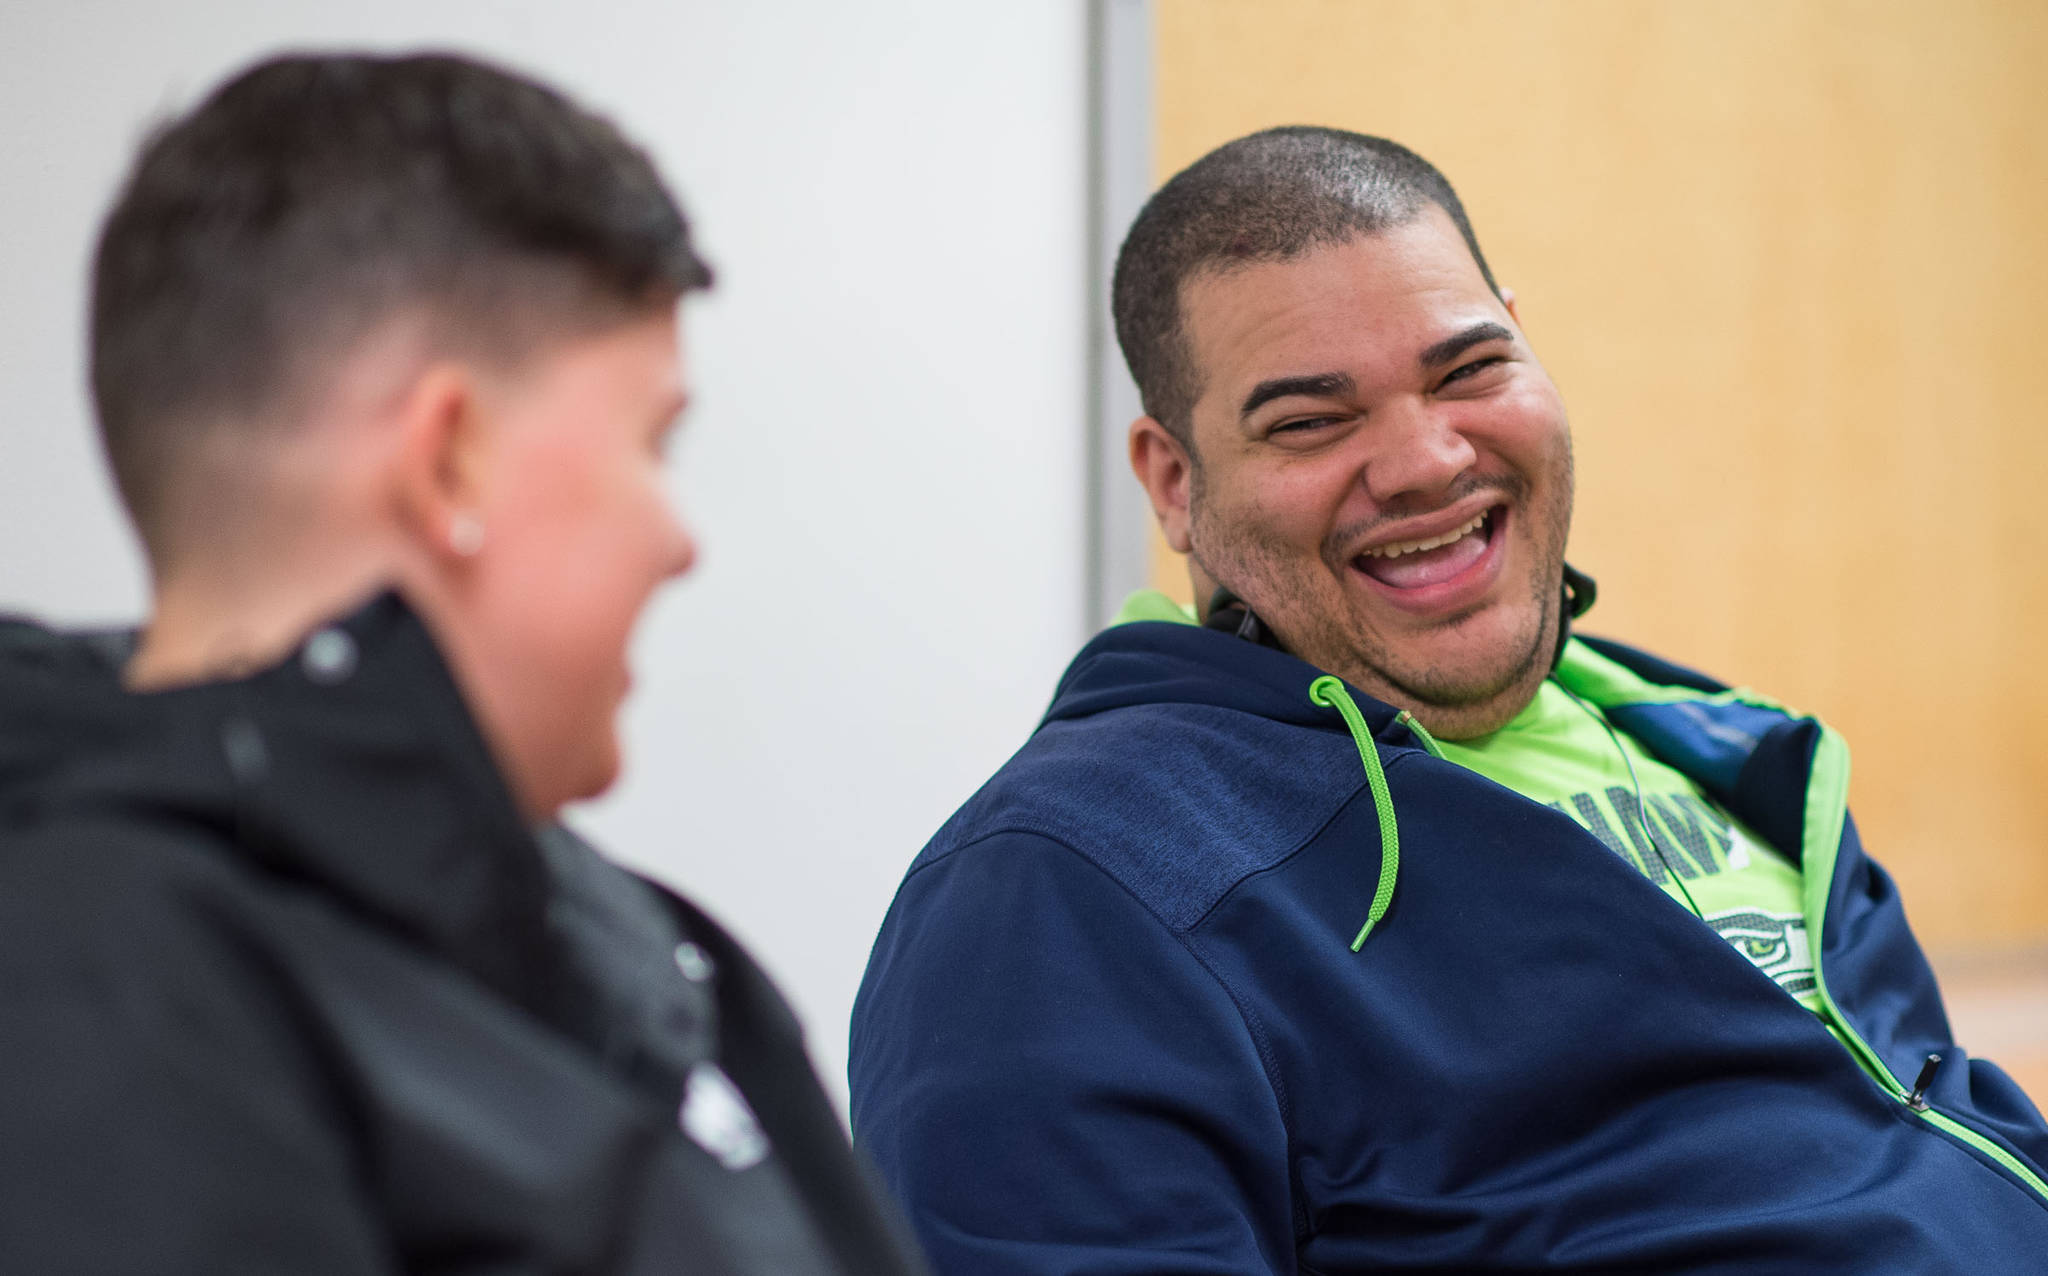 REACH client Niall Johnson, right, shares a laugh with Laurel Stafford, a employment specialist at REACH, on Friday, Sept. 29, 2017. Johnson currently works at Office Max in the Nugget Mall. October is National Disability Employment Awareness Month. (Michael Penn | Juneau Empire)